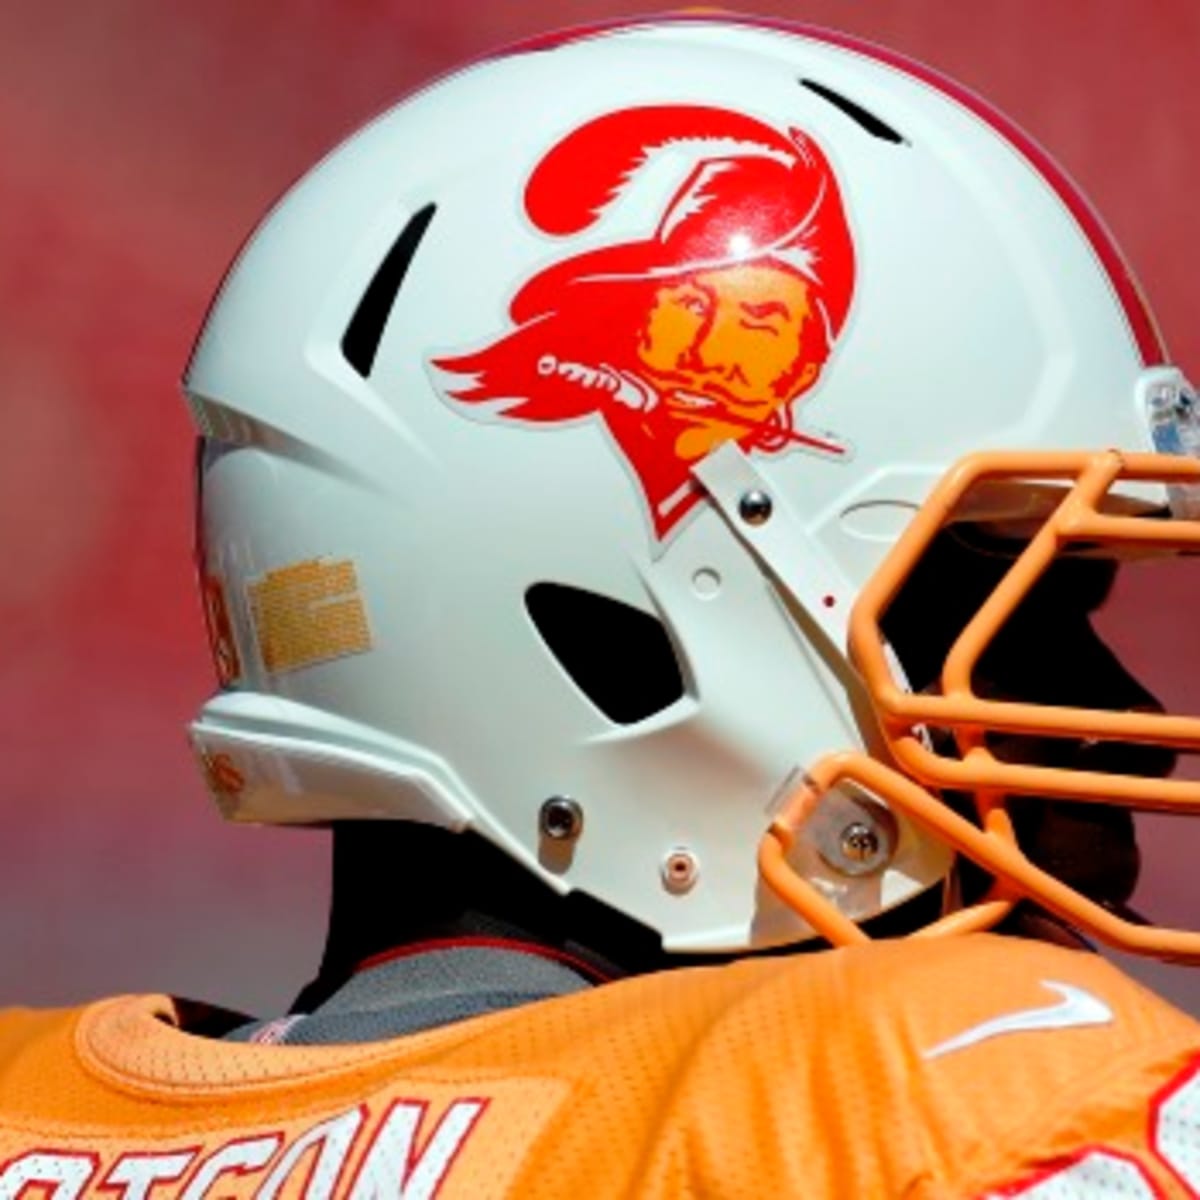 NFL Throwback Helmets Are Back! NFL Throwback Uniforms That MUST